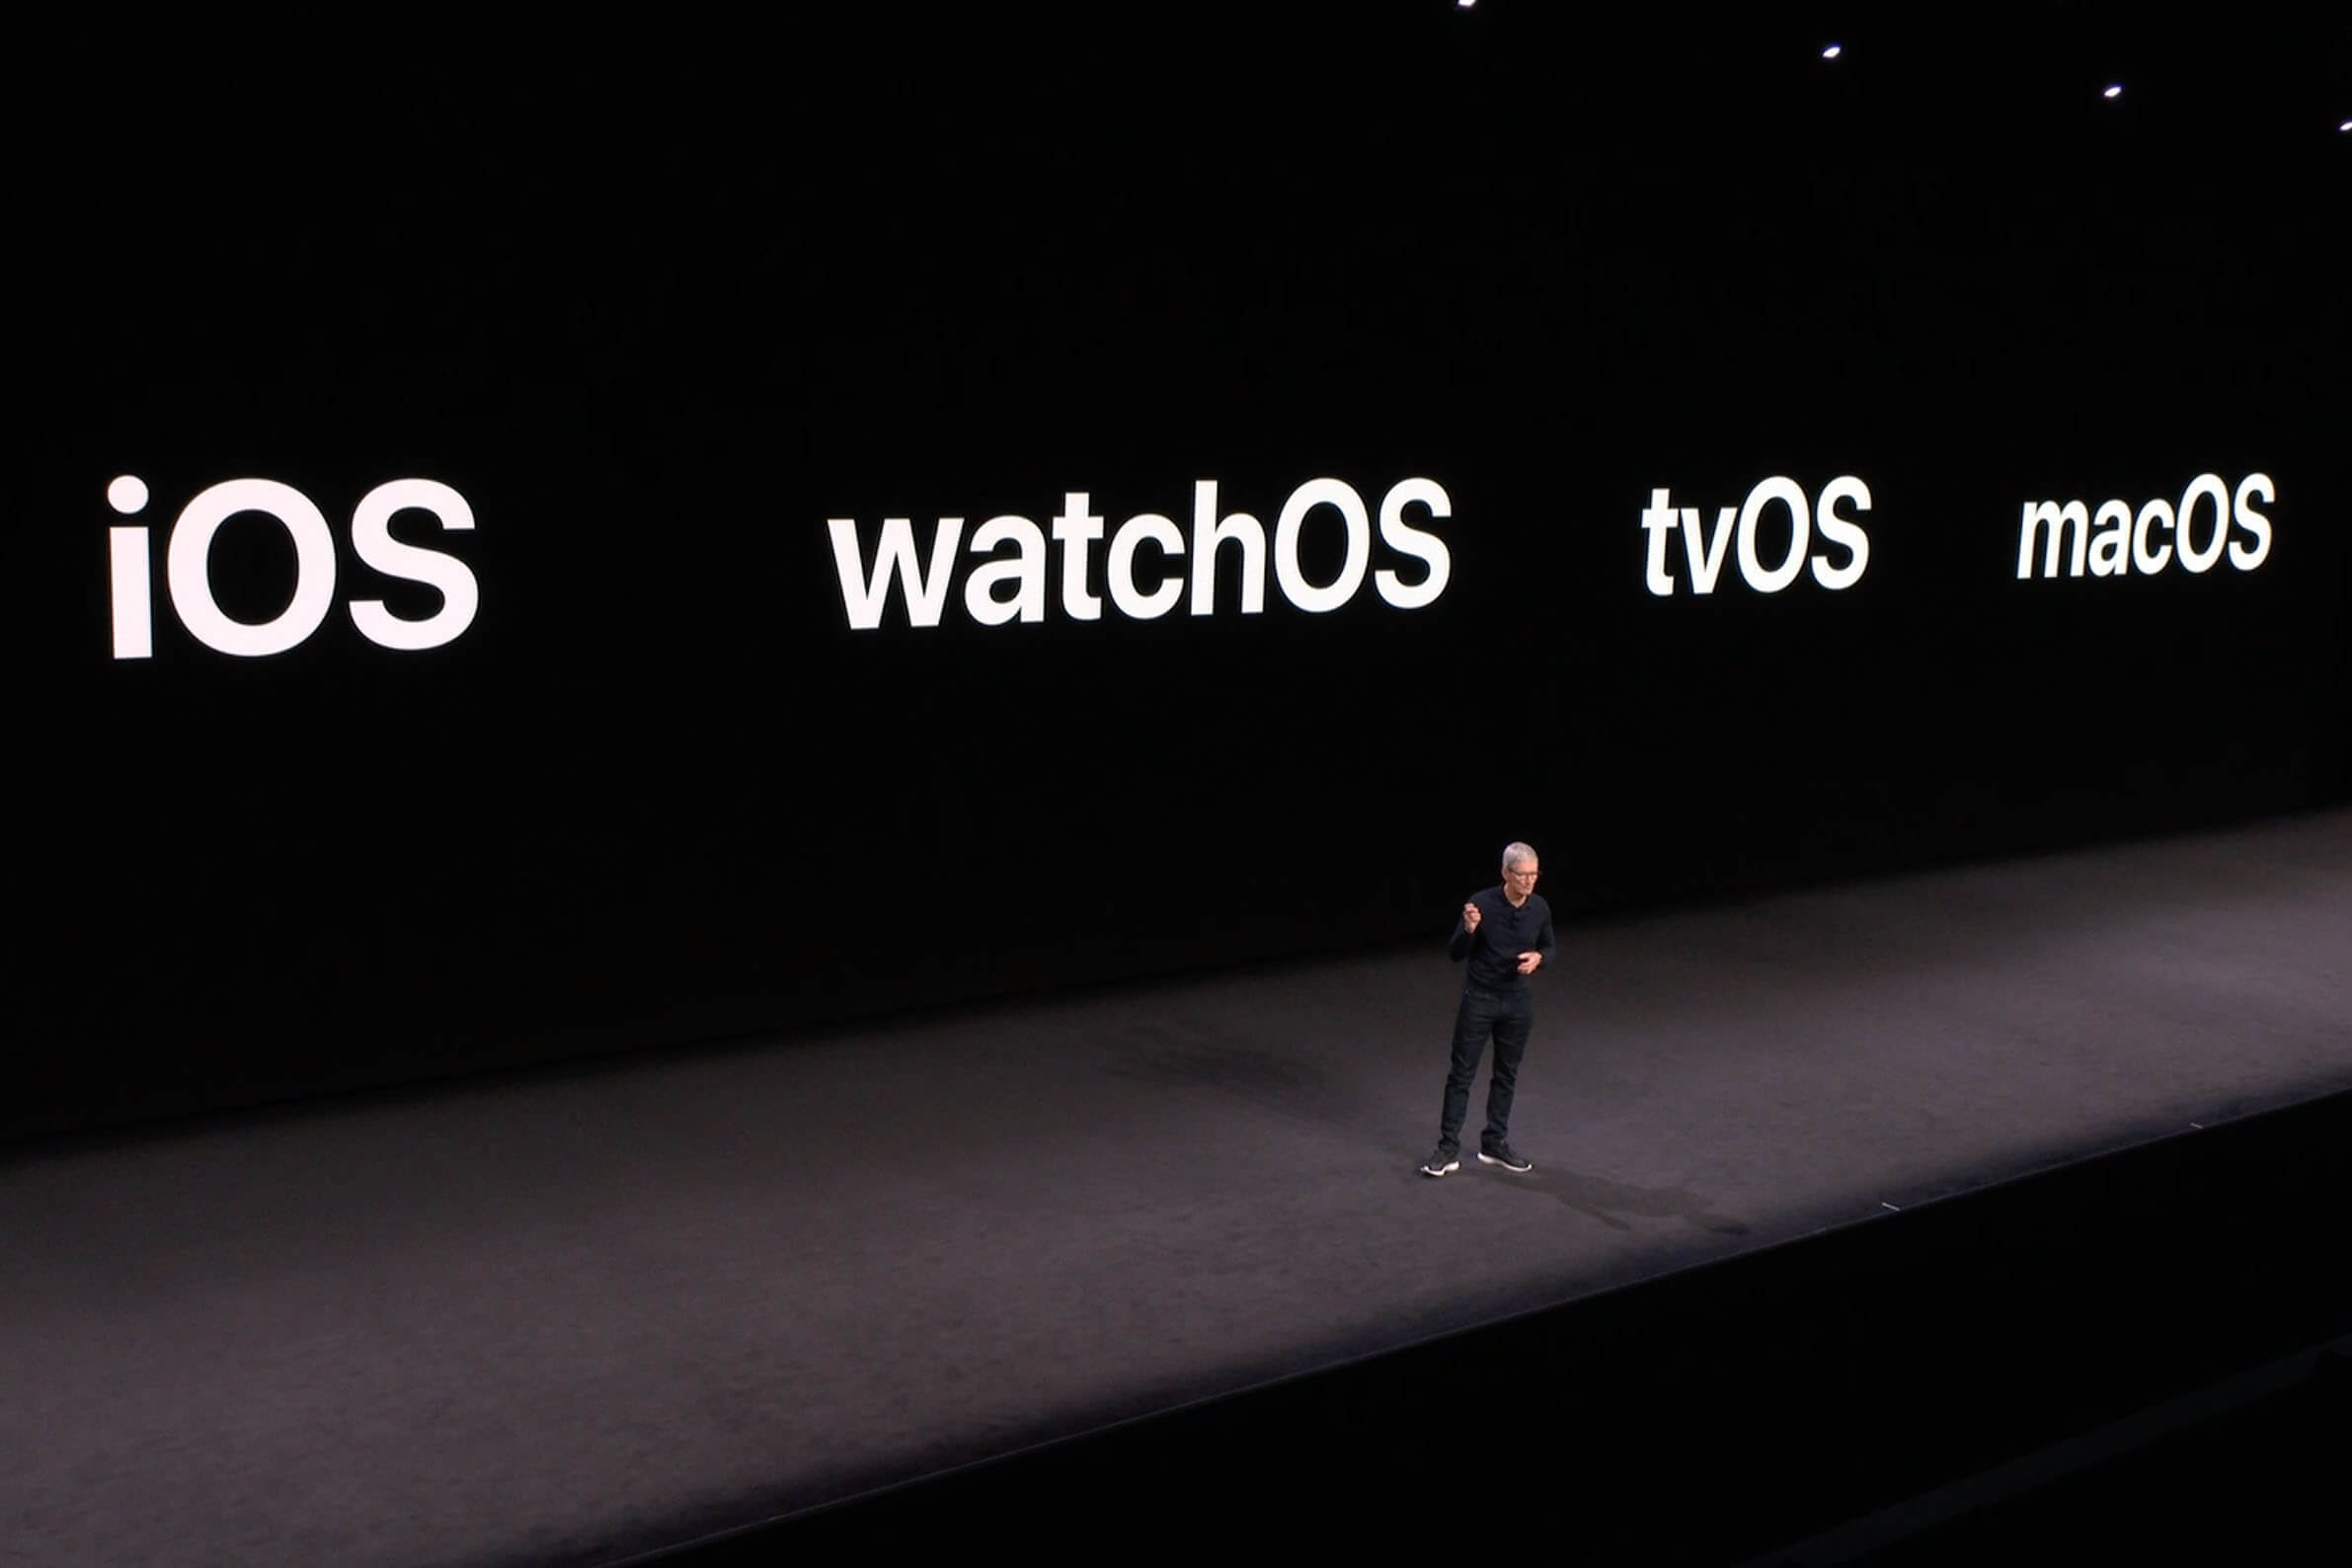 Apple announces watchOS 6 now with its own App Store